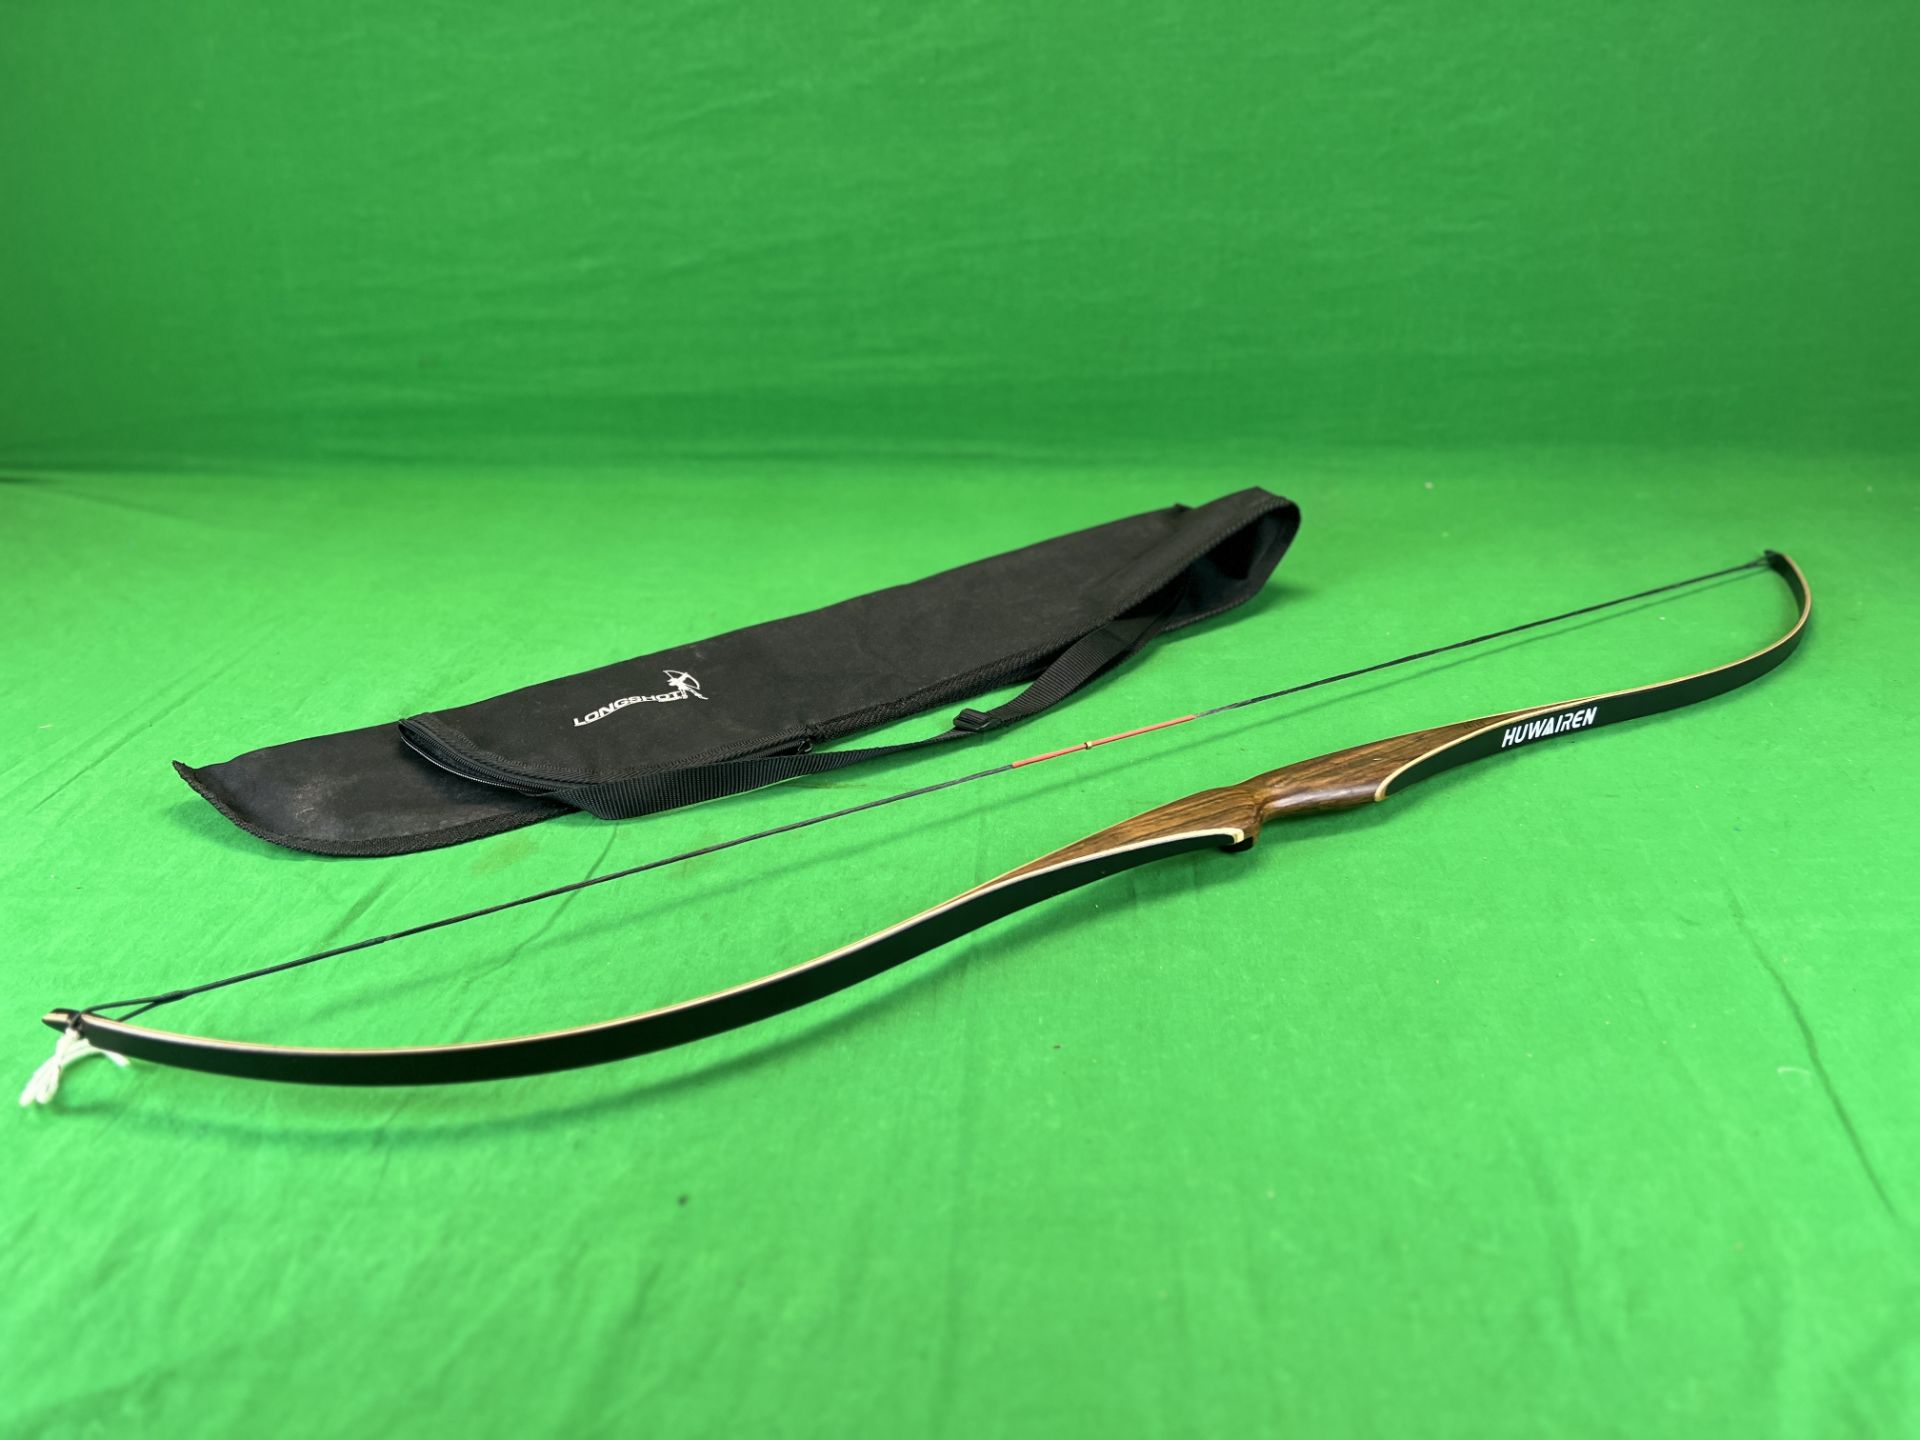 A HUWAIREN RECURVE BOW AND CARRY BAG - TO BE COLLECTED IN PERSON ONLY - NO POSTAGE OR PACKING